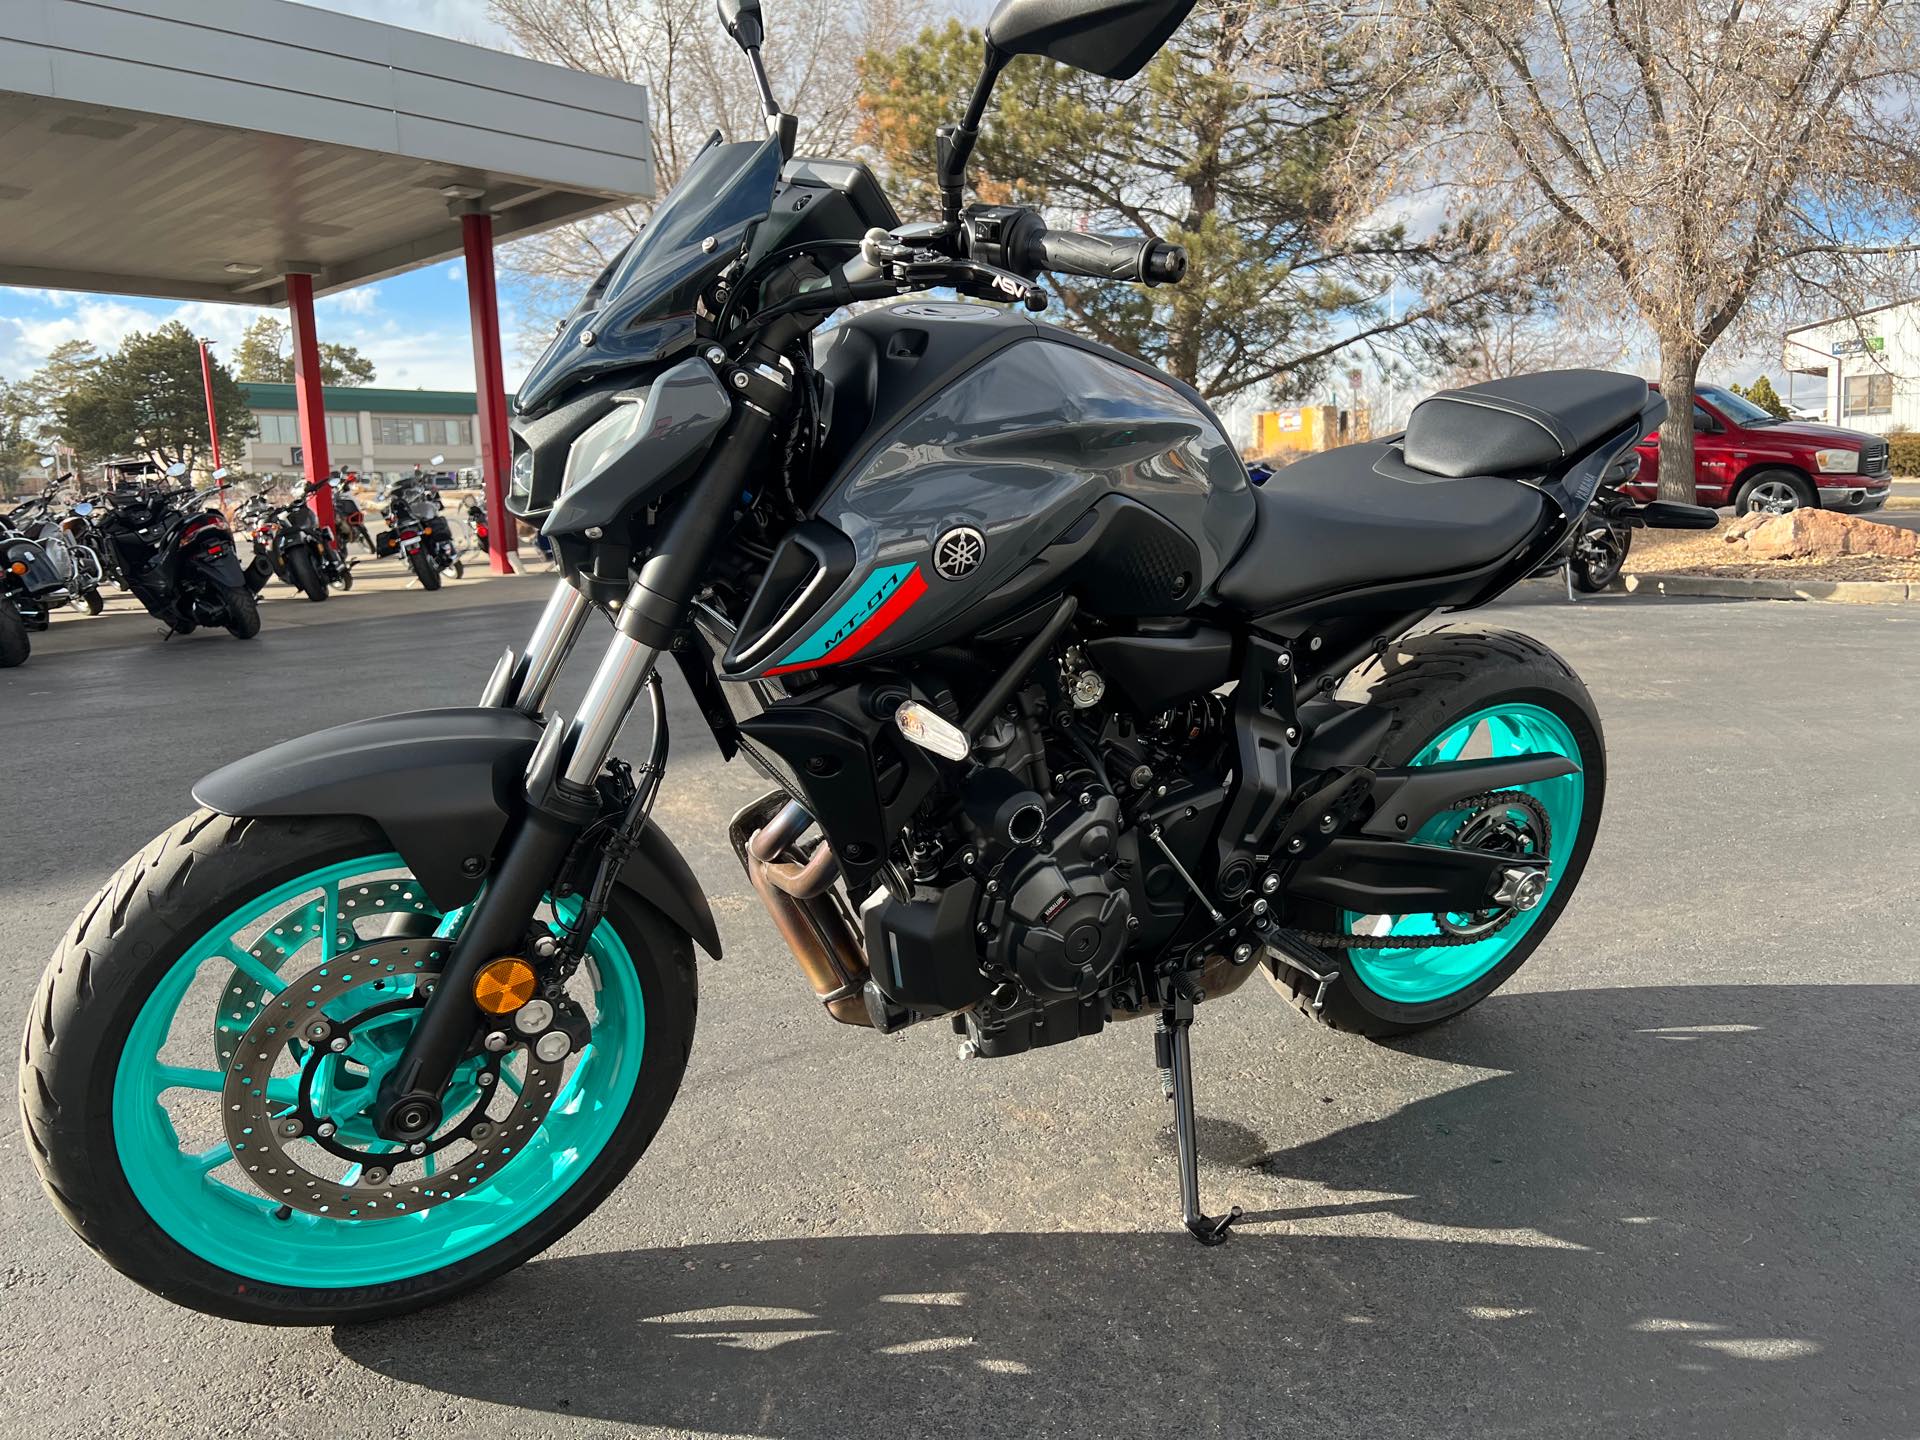 2023 Yamaha MT 07 at Aces Motorcycles - Fort Collins